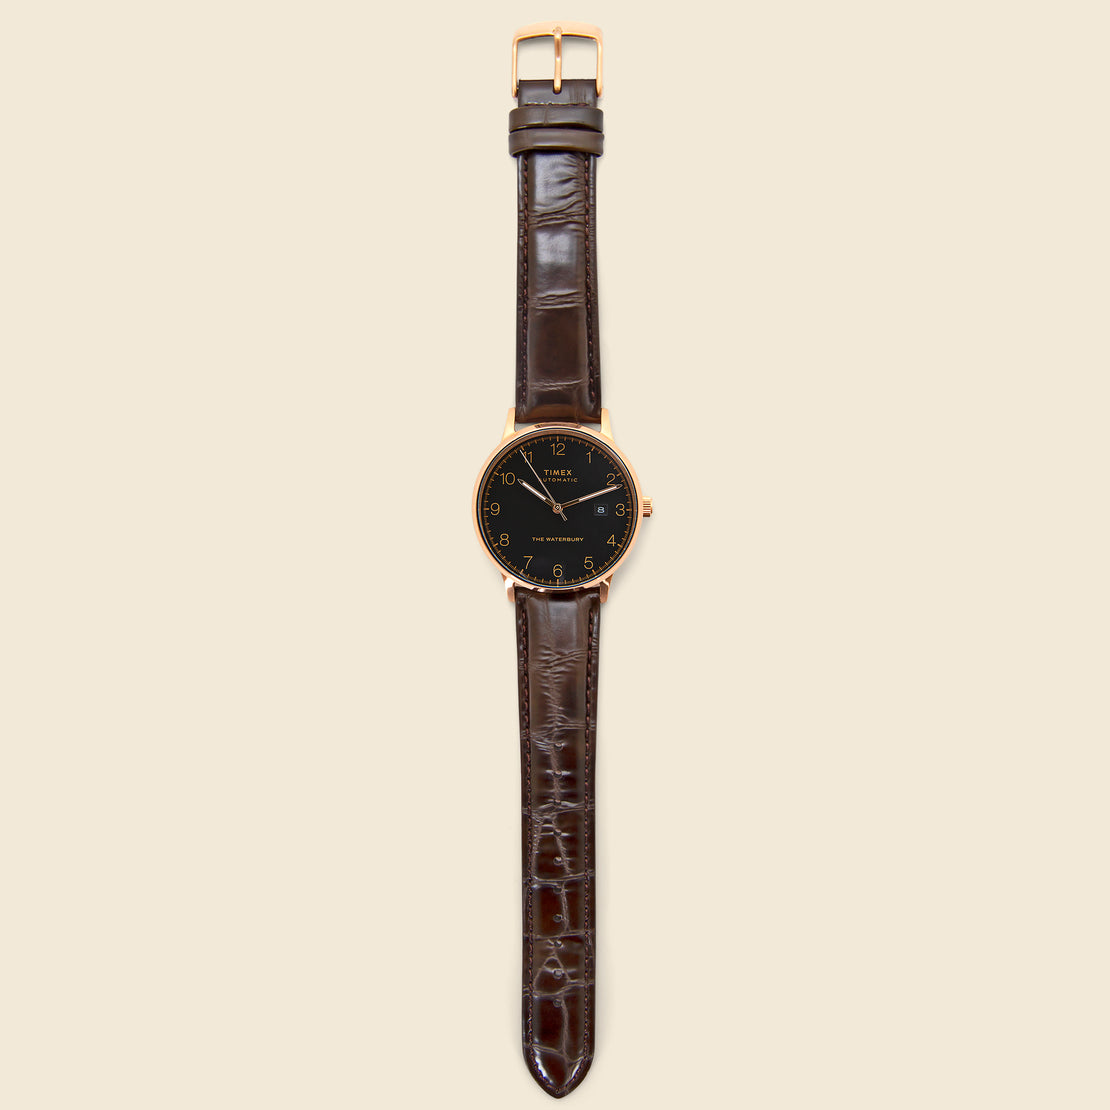 Waterbury Leather Strap Watch 40mm - Rose Gold Tone/Brown/Black - Timex - STAG Provisions - Accessories - Watches